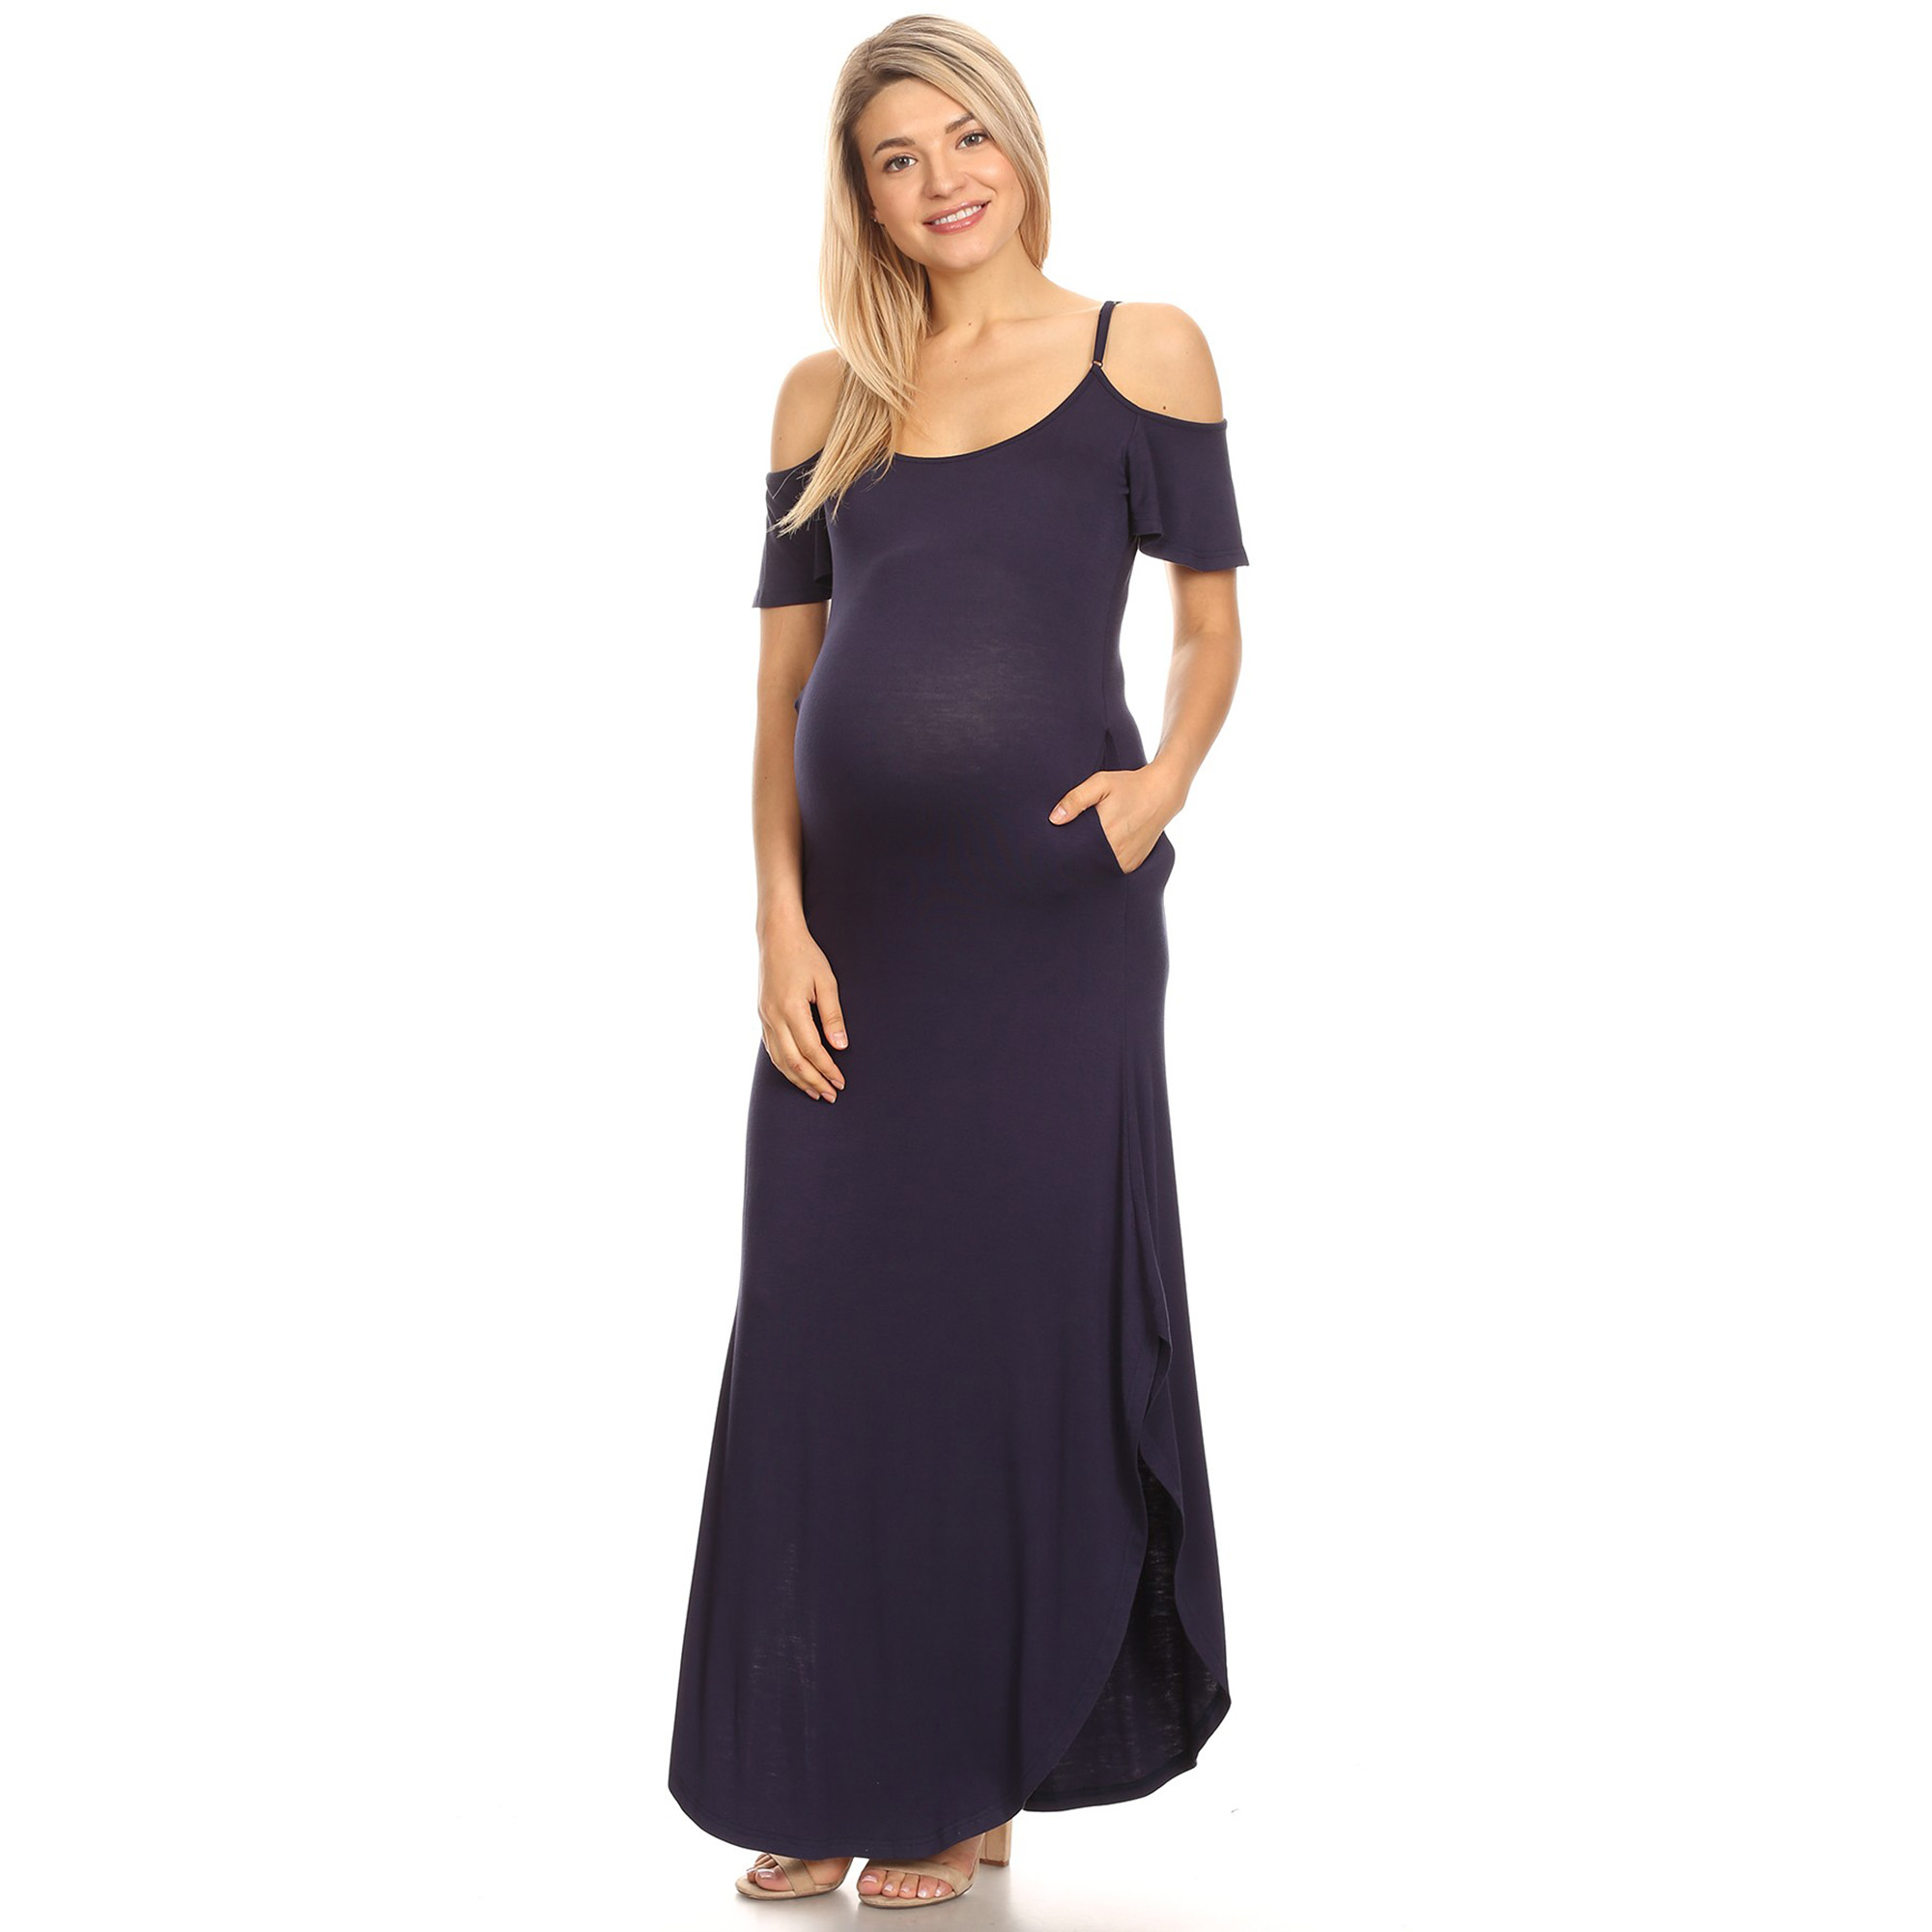 White Mark Women's Maternity Cold Shoulder Maxi Dress - Green, X-Large